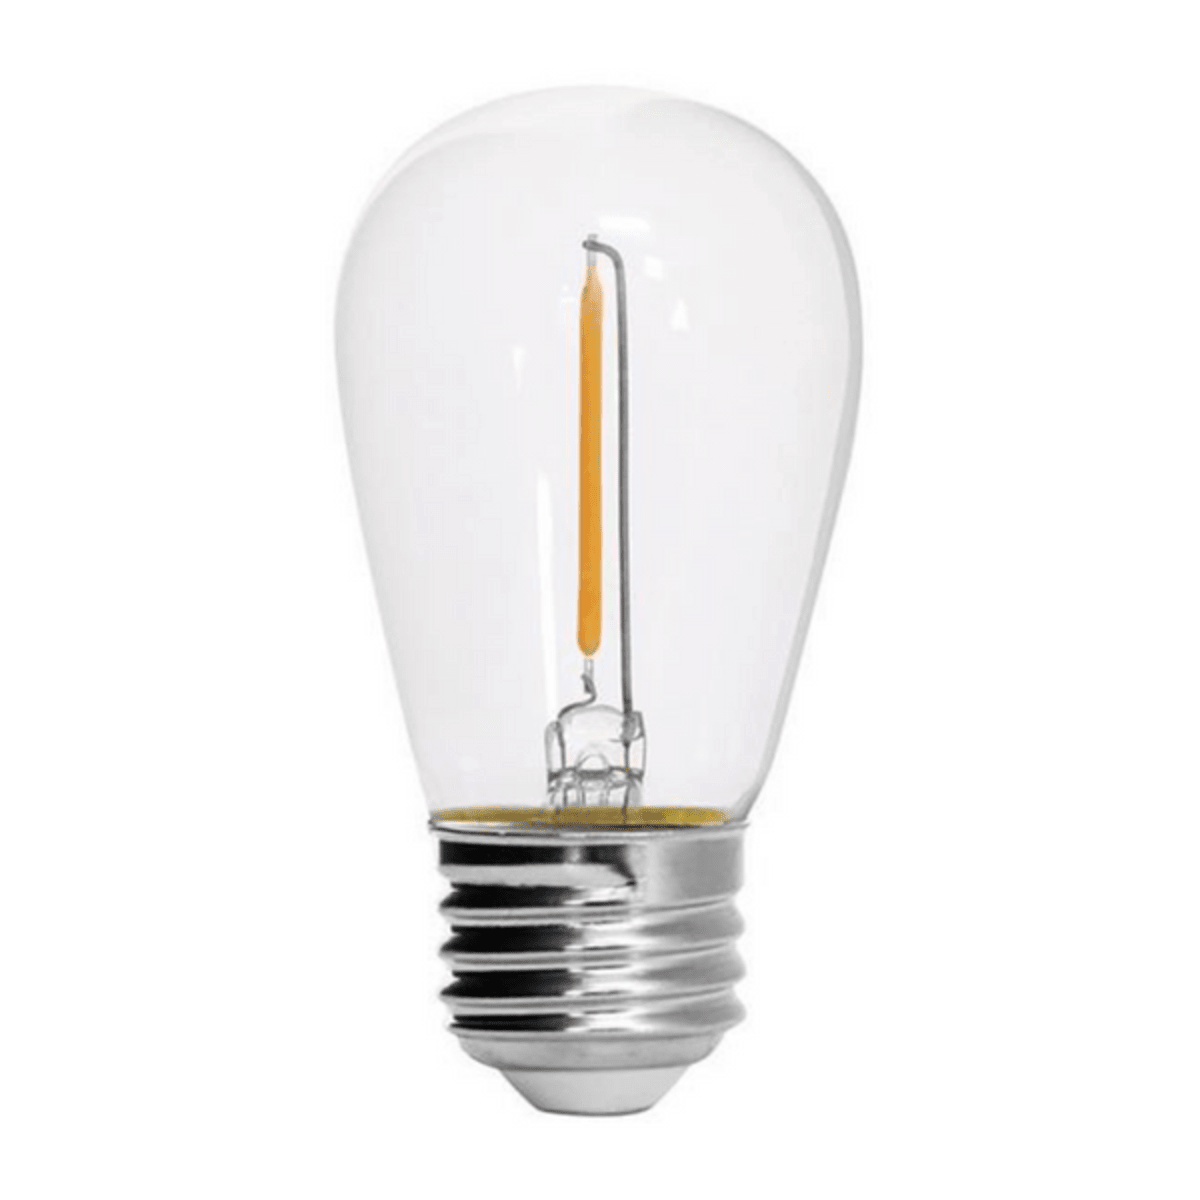 Litehouse Traditional Solar Festoon LED Replacement Bulb